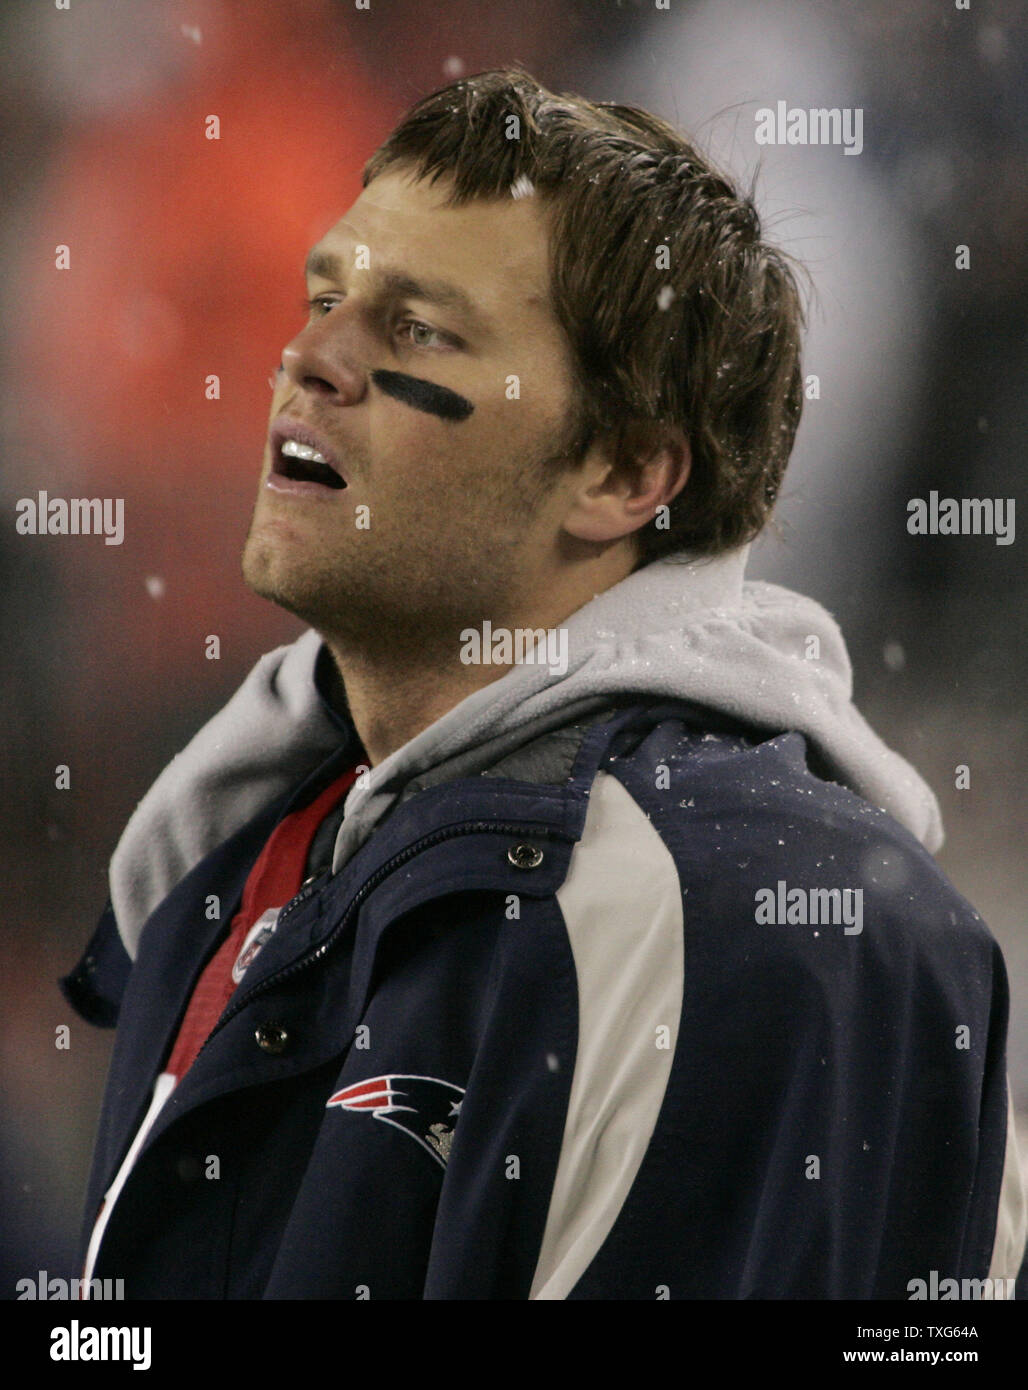 New England Patriots quarterback Tom Brady (12) watches the game from the sideline in the third quarter against the Tennessee Titans at Gillette Stadium in Foxboro, Massachusetts on October 18, 2009.   The Patriots defeated the Titans 59-0.  UPI/Matthew Healey Stock Photo